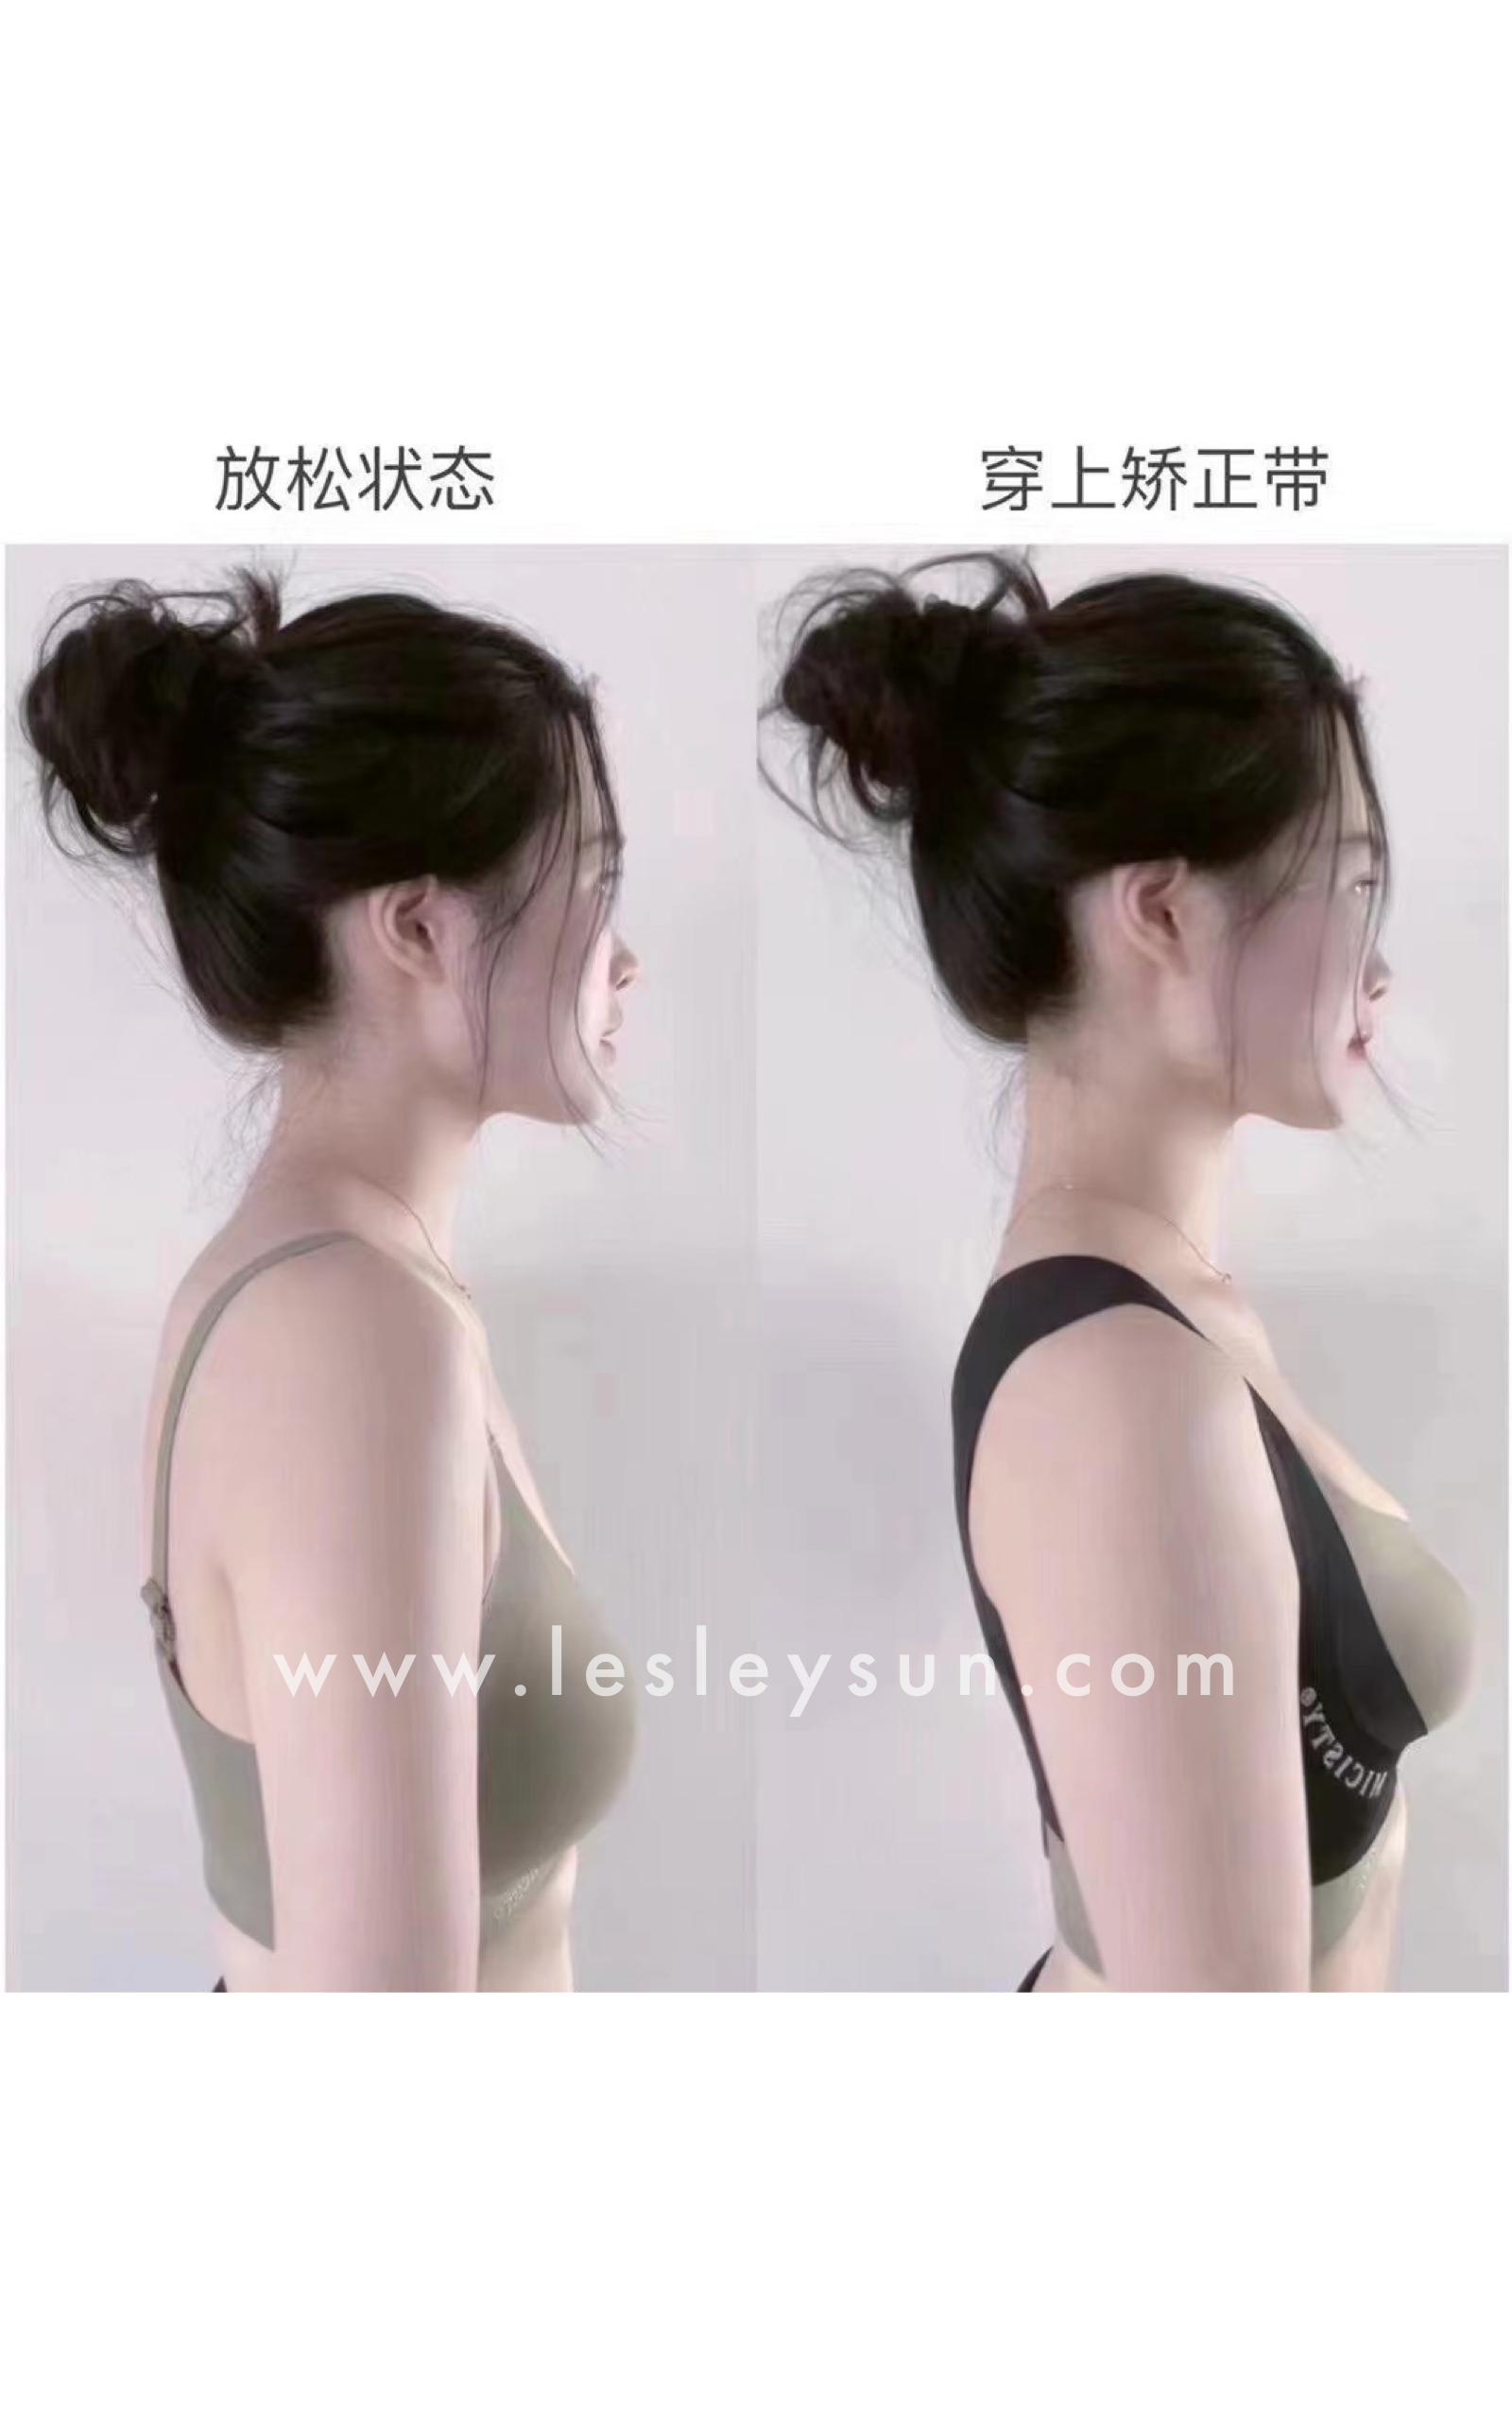 Authentic Micisty Back Support Strap [Due to hygiene concerns, no exchange is permissible]